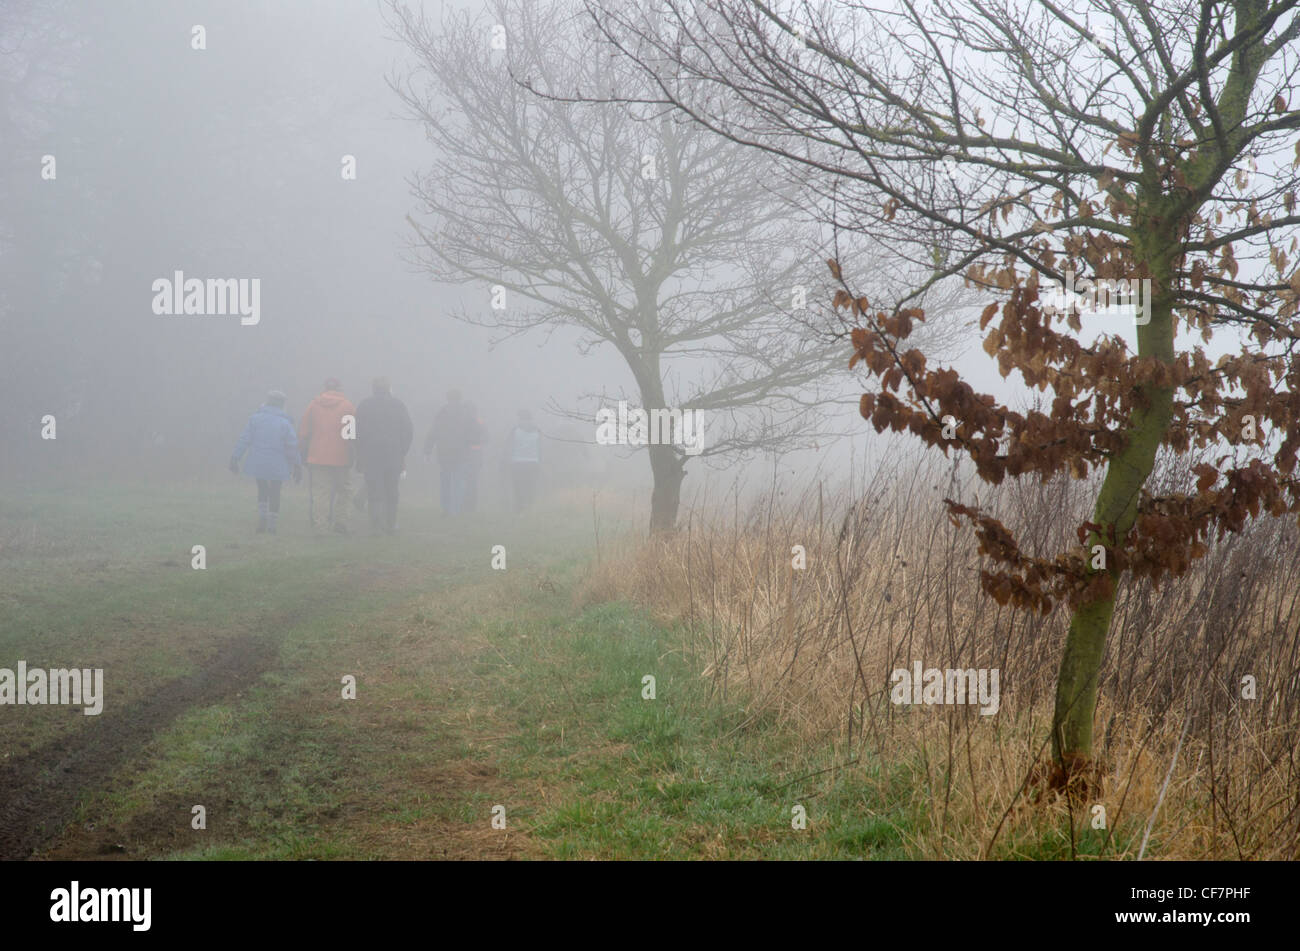 Group of walkers in the mist on a country track Stock Photo